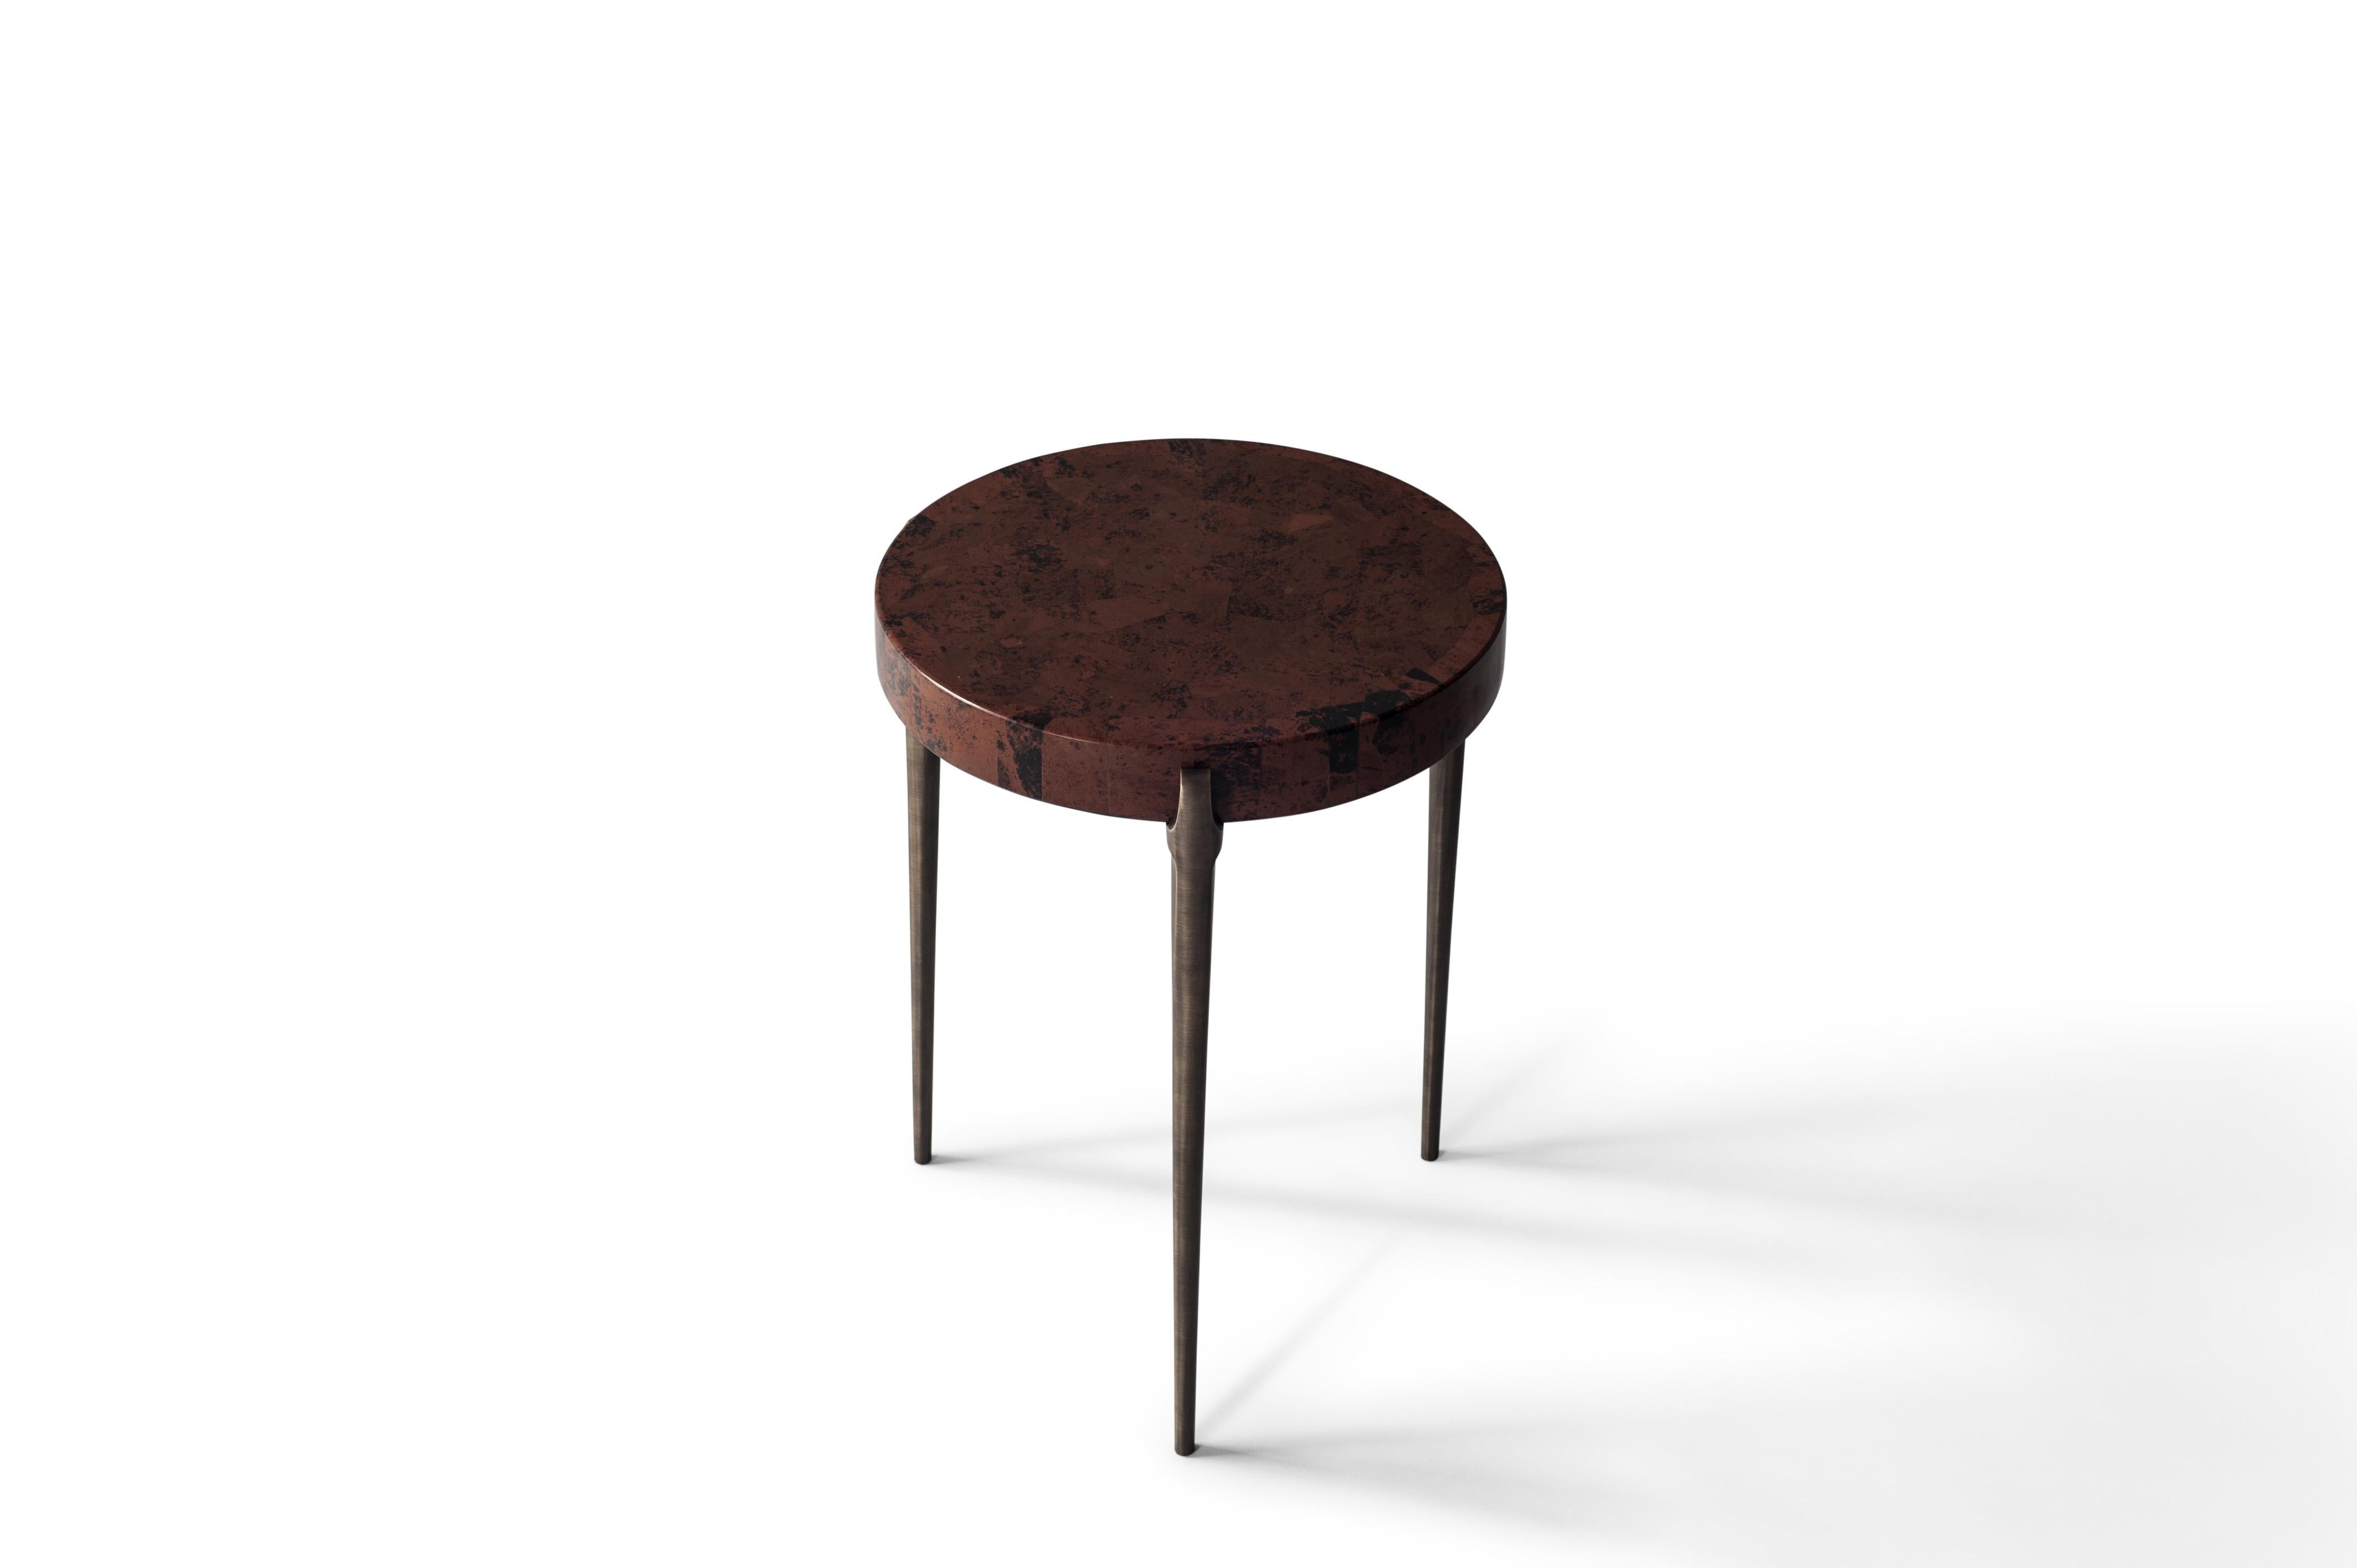 Acantha side table by DeMuro Das 
Dimensions: 41.5 x 55.1 cm
Materials: Marconi Jasper - Polished (Random)
 Solid Bronze (Antique) legs

Dimensions and finishes can be customized.

DeMuro Das is an international design firm and the aesthetic and